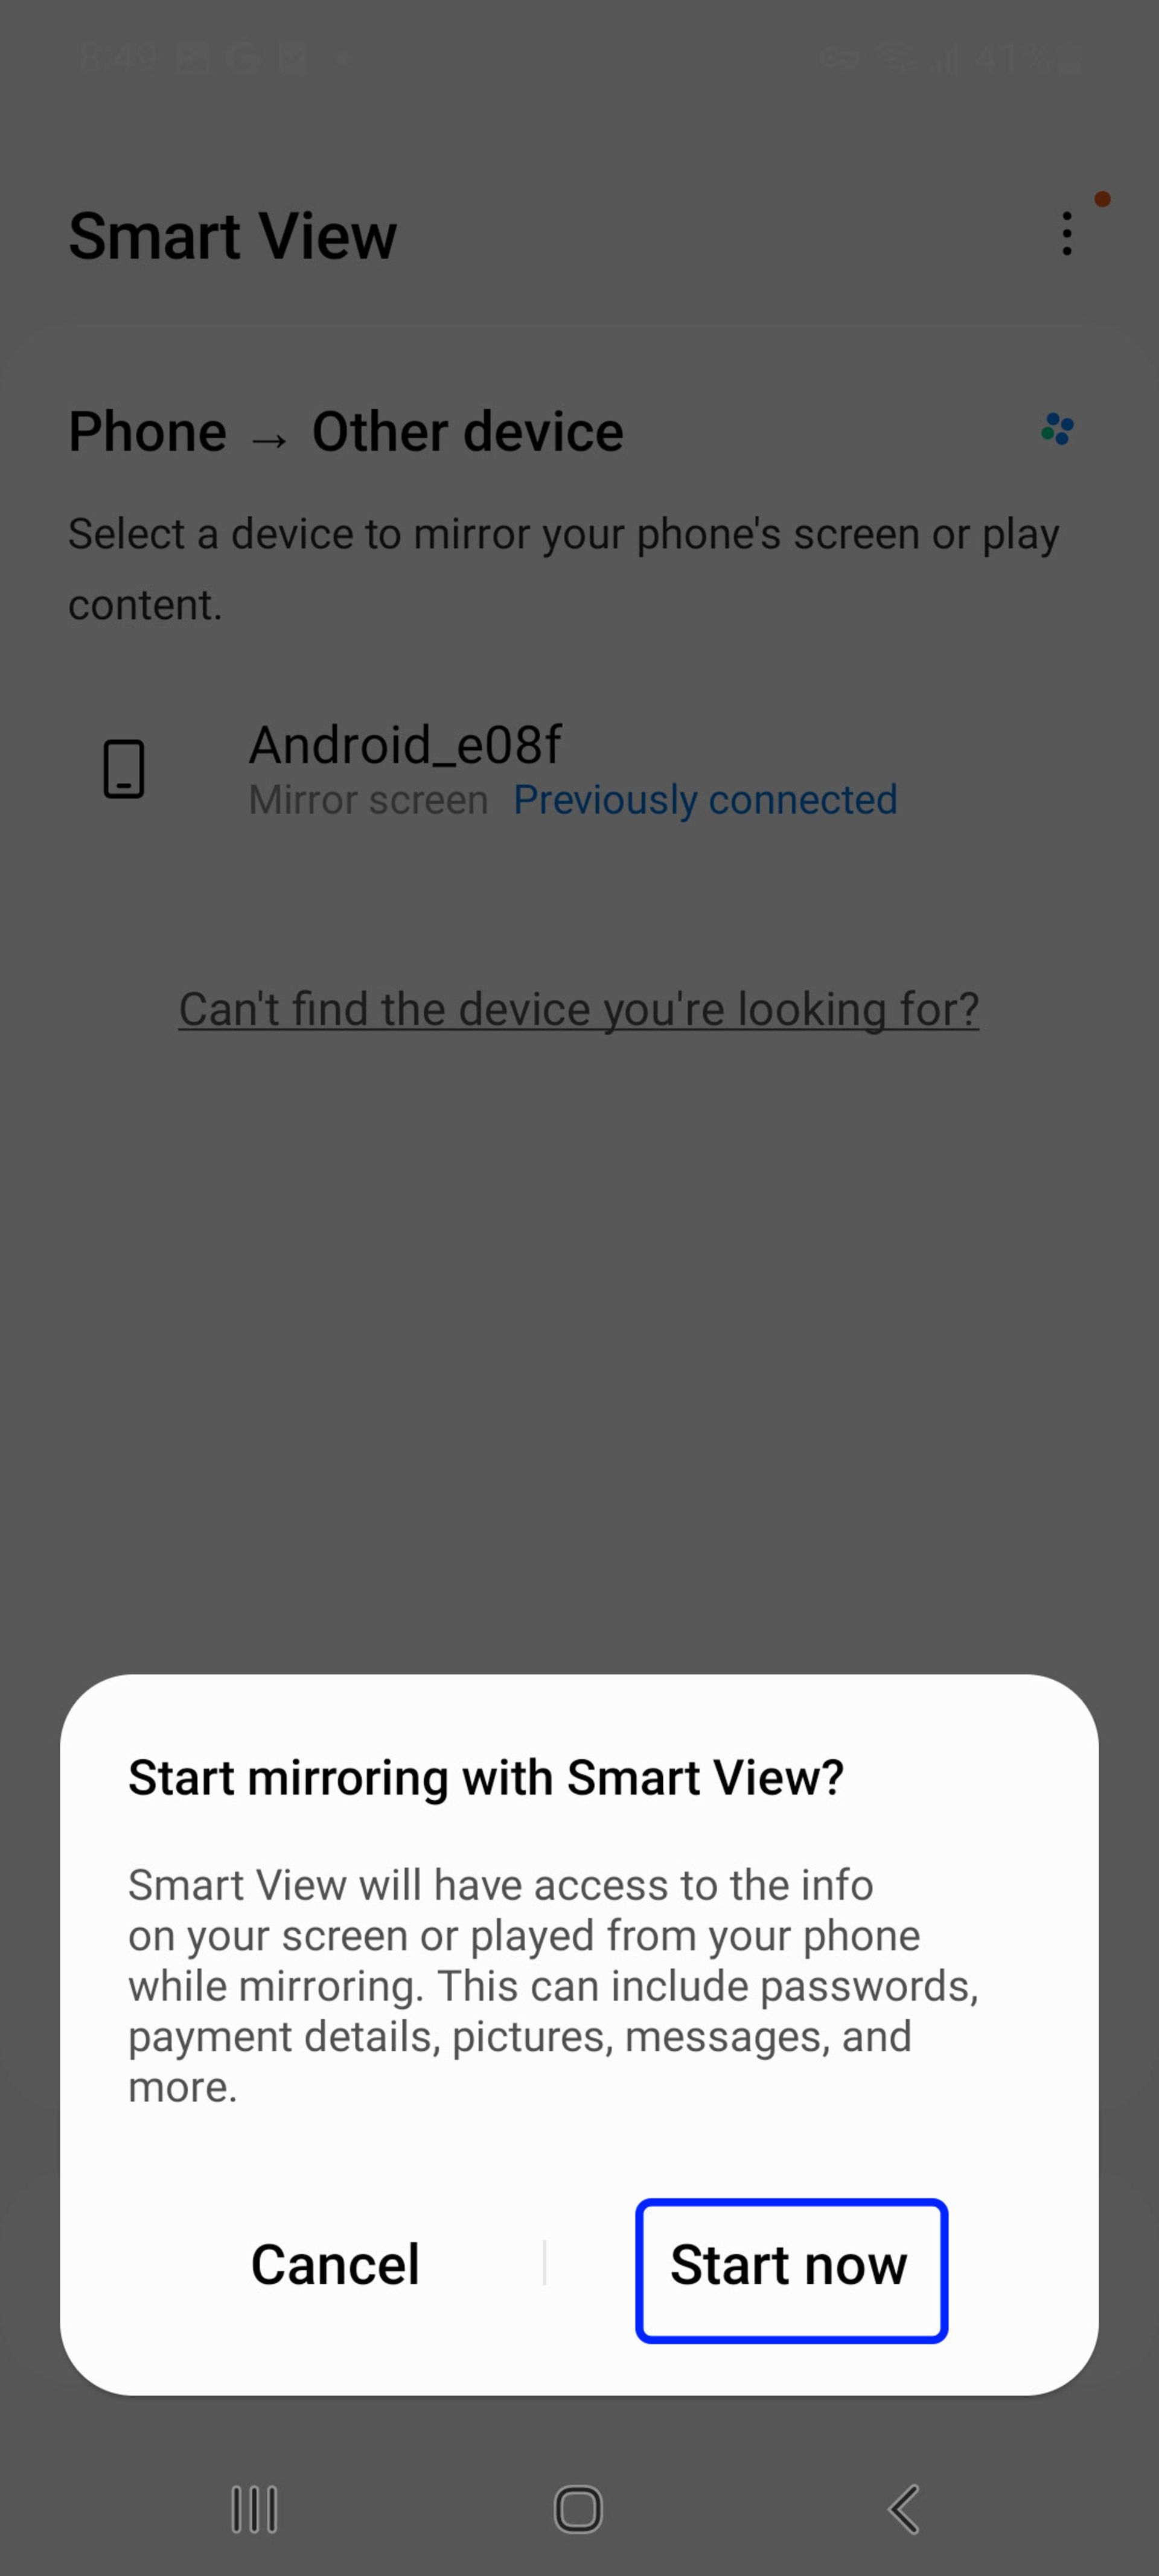 Tap on Start Now on the Samsung phone to connect to the Smart view feature